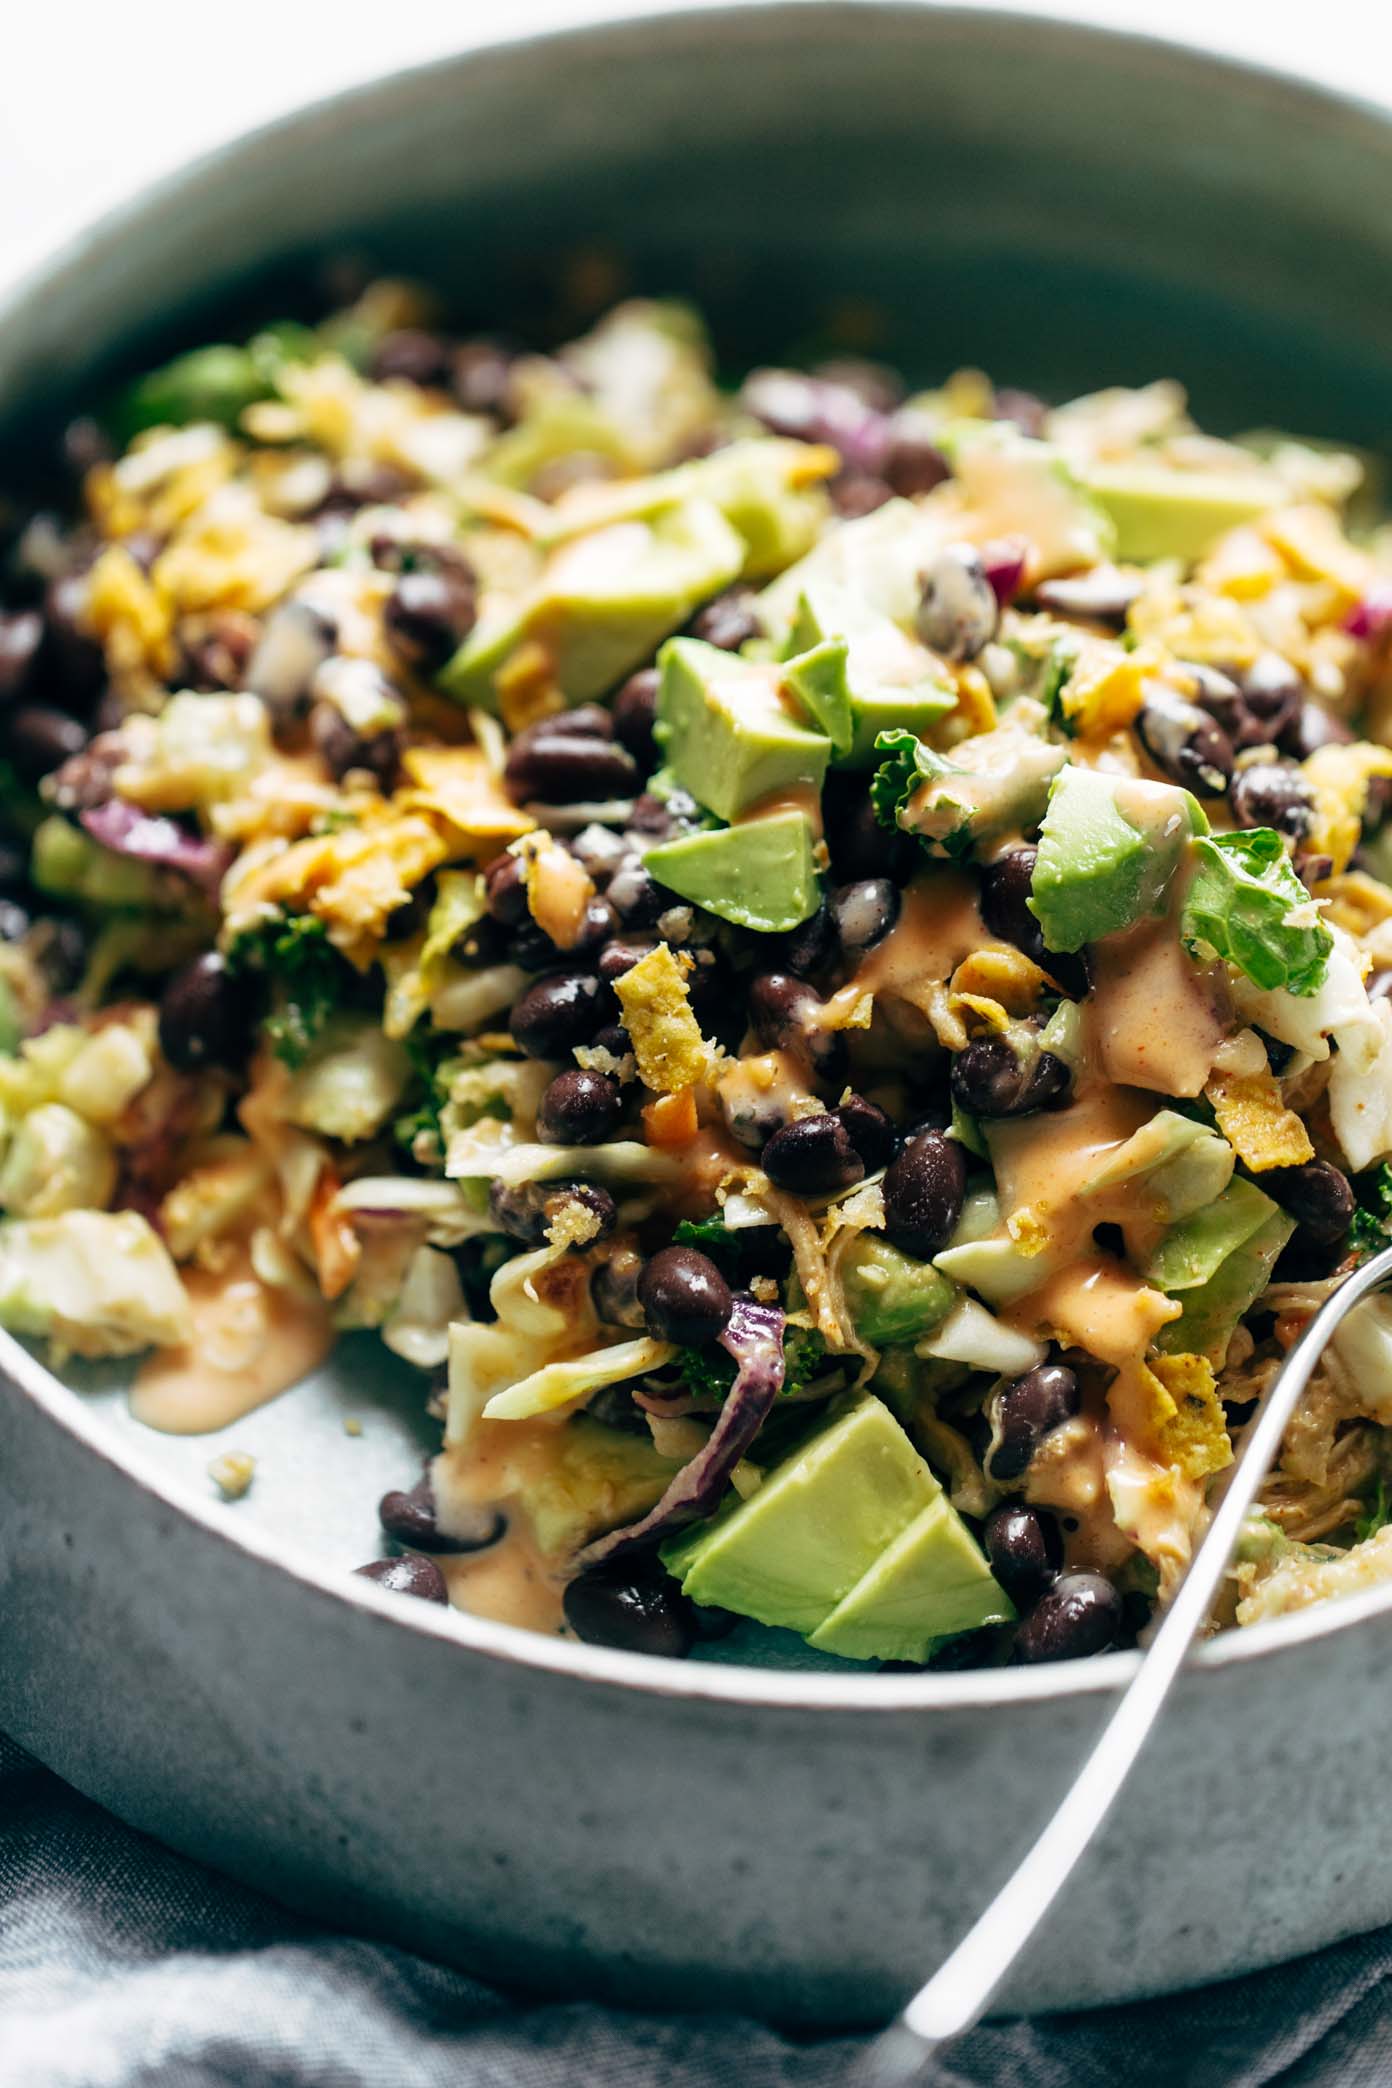 Cheater's Power Salad - kale, cabbage, avocado, green onion, cilantro, black beans, crispy onions, tortilla strips, chicken, and BBQ ranch dressing, made from a salad mix! I KNOW. perfect for easy lunches! | pinchofyum.com